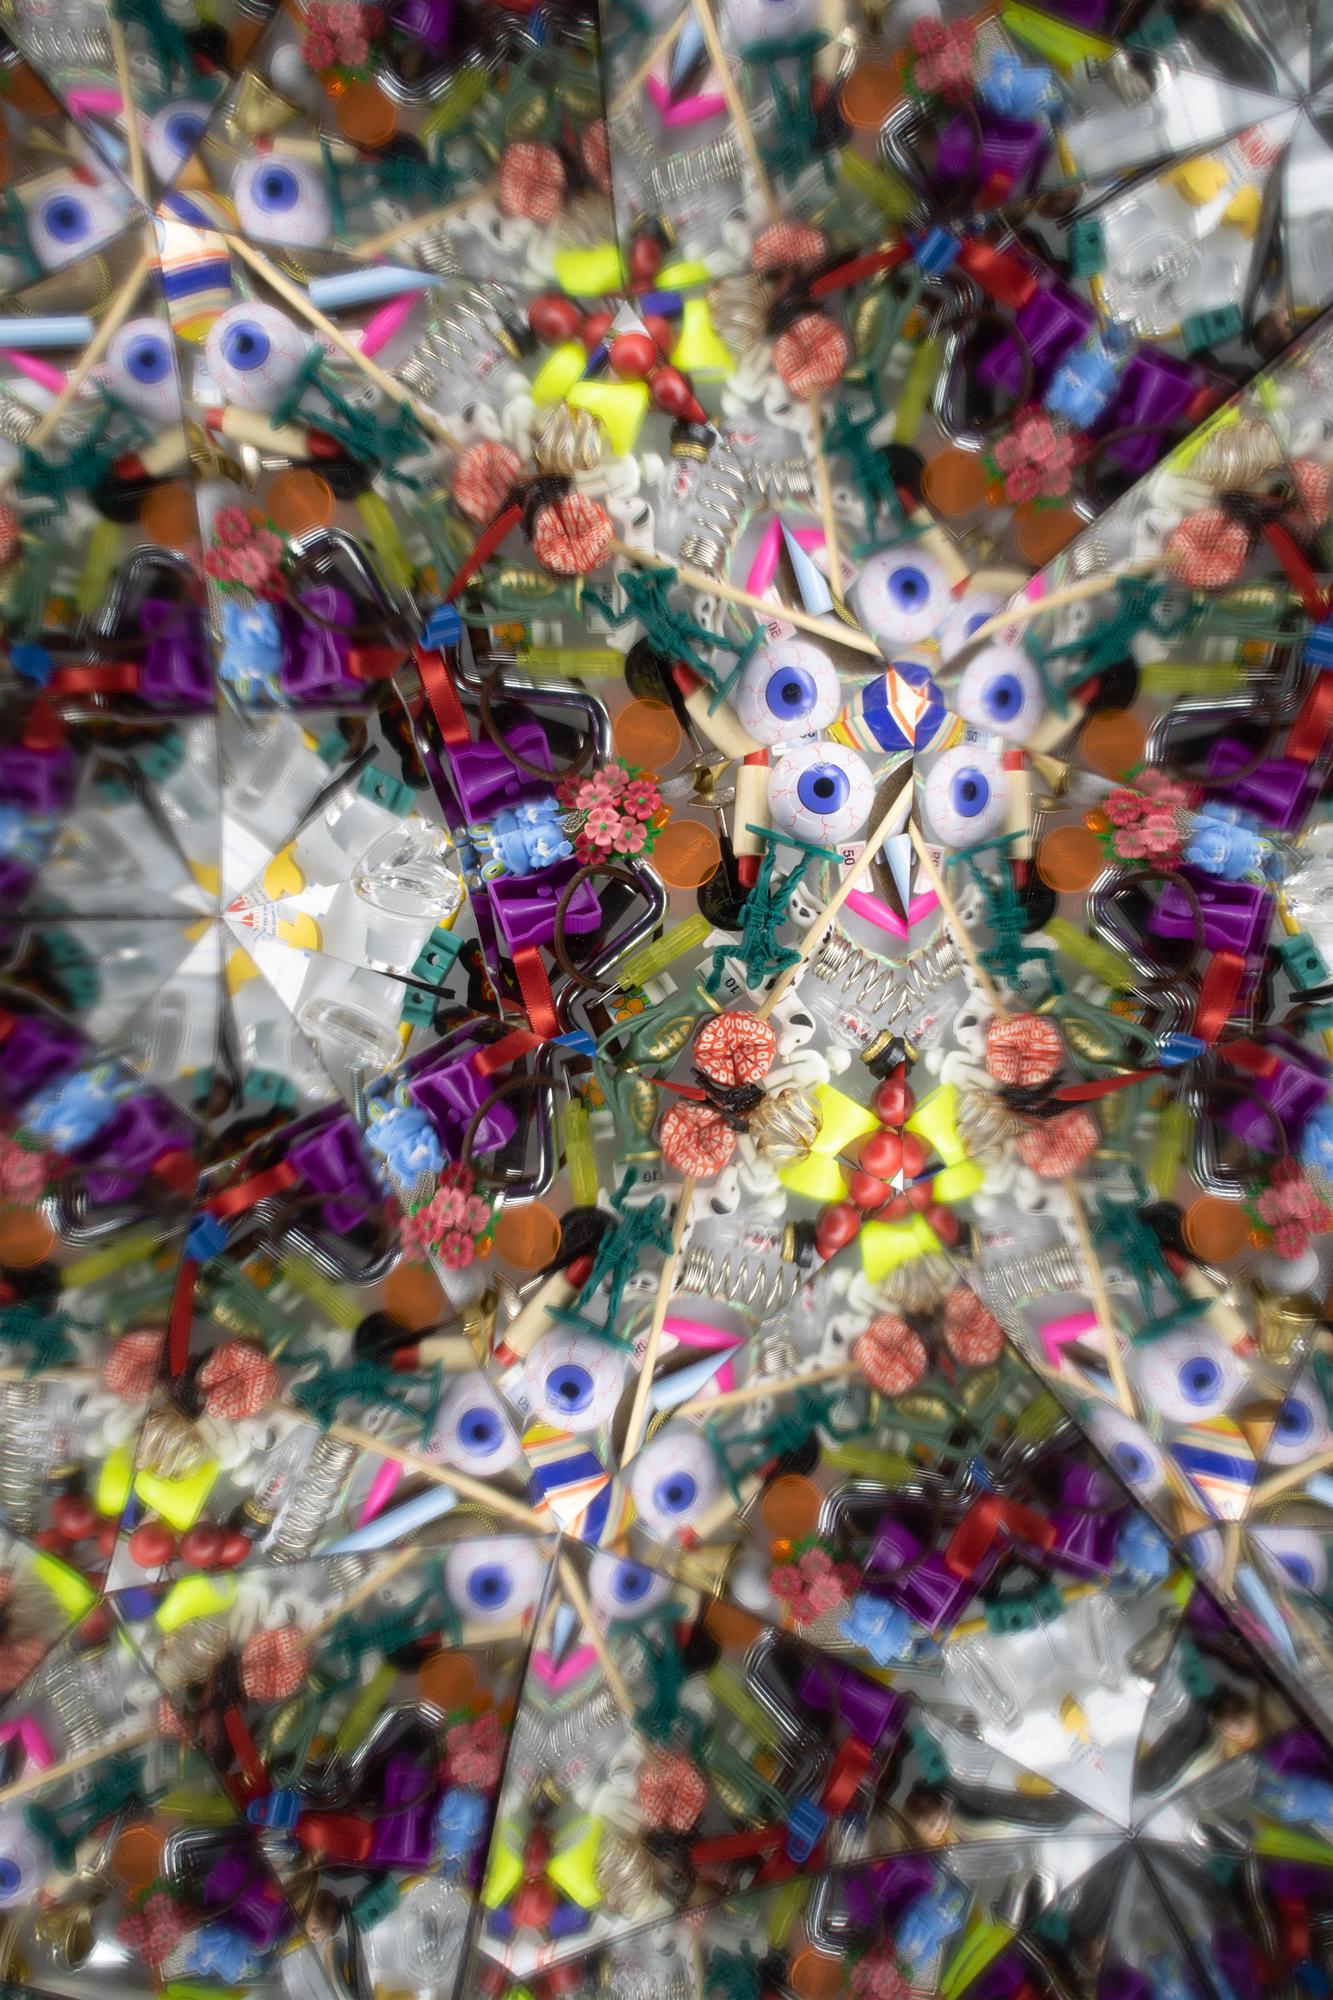 Anna Tas Abstract Photograph - "In Praise of Entropy (Untitled #1)", Lenticular Print, Kaleidoscope, transition